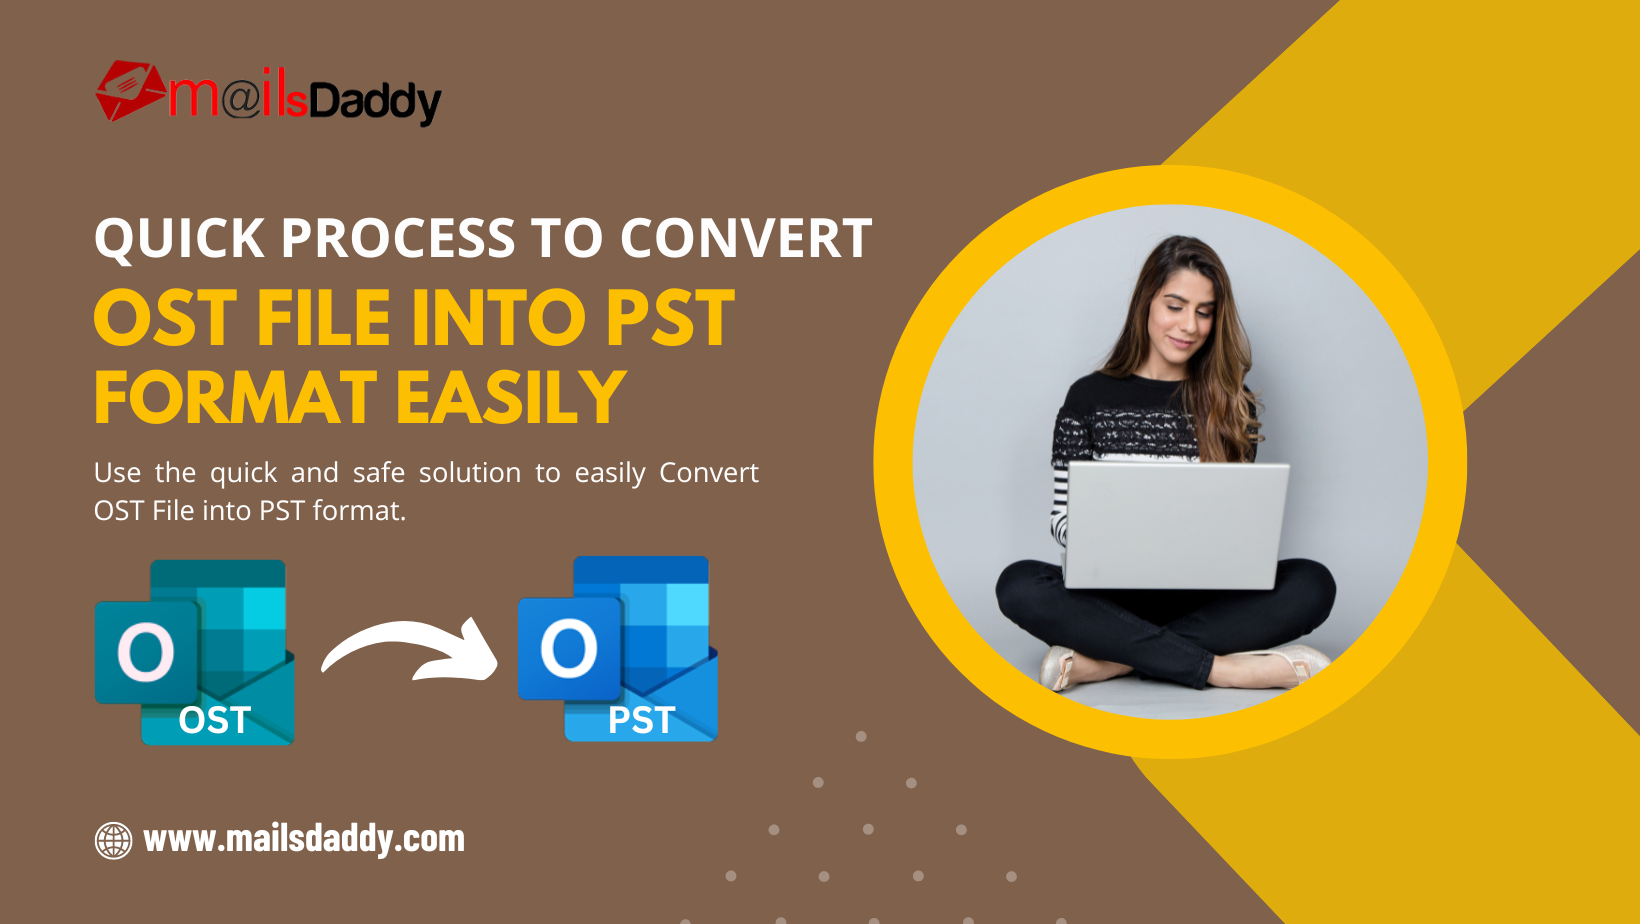 Quick Process to Convert OST File into PST Format Easily